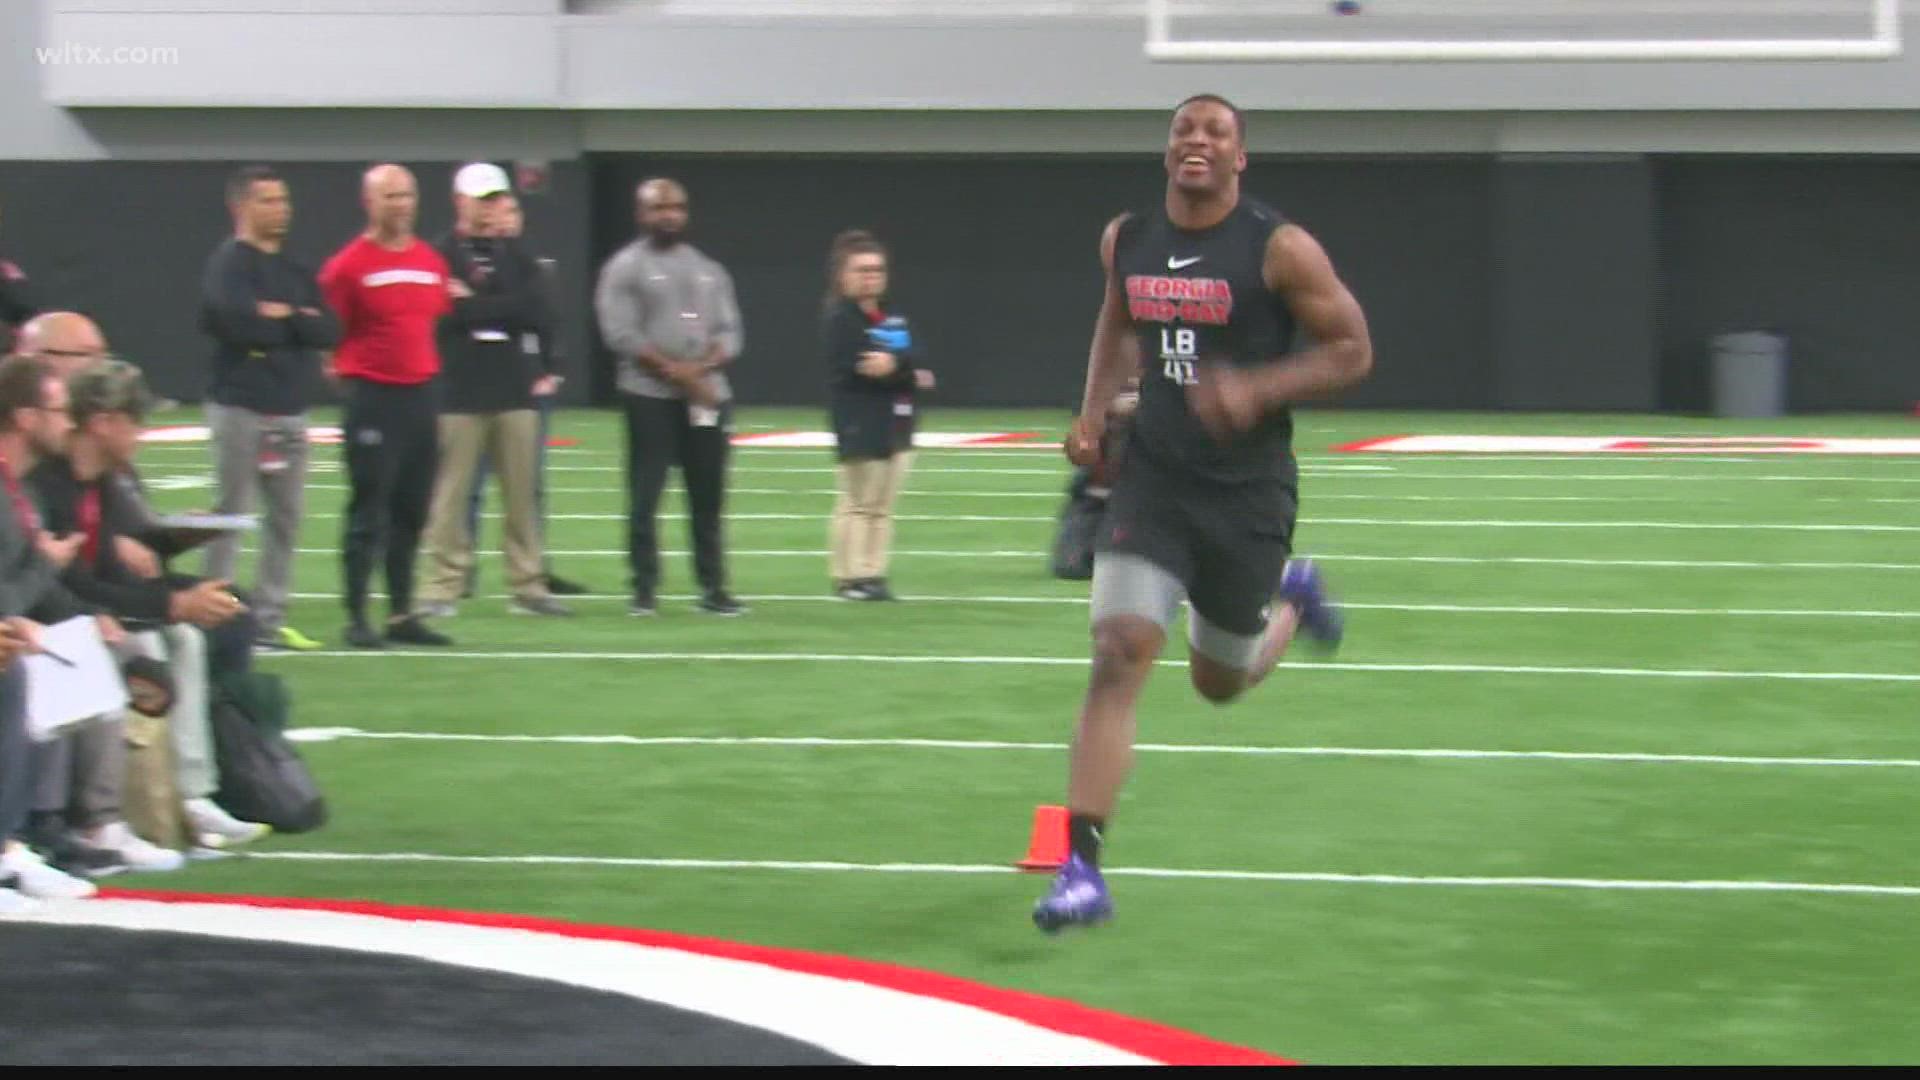 Channing Tindall's path to the NFL continues with Pro Day